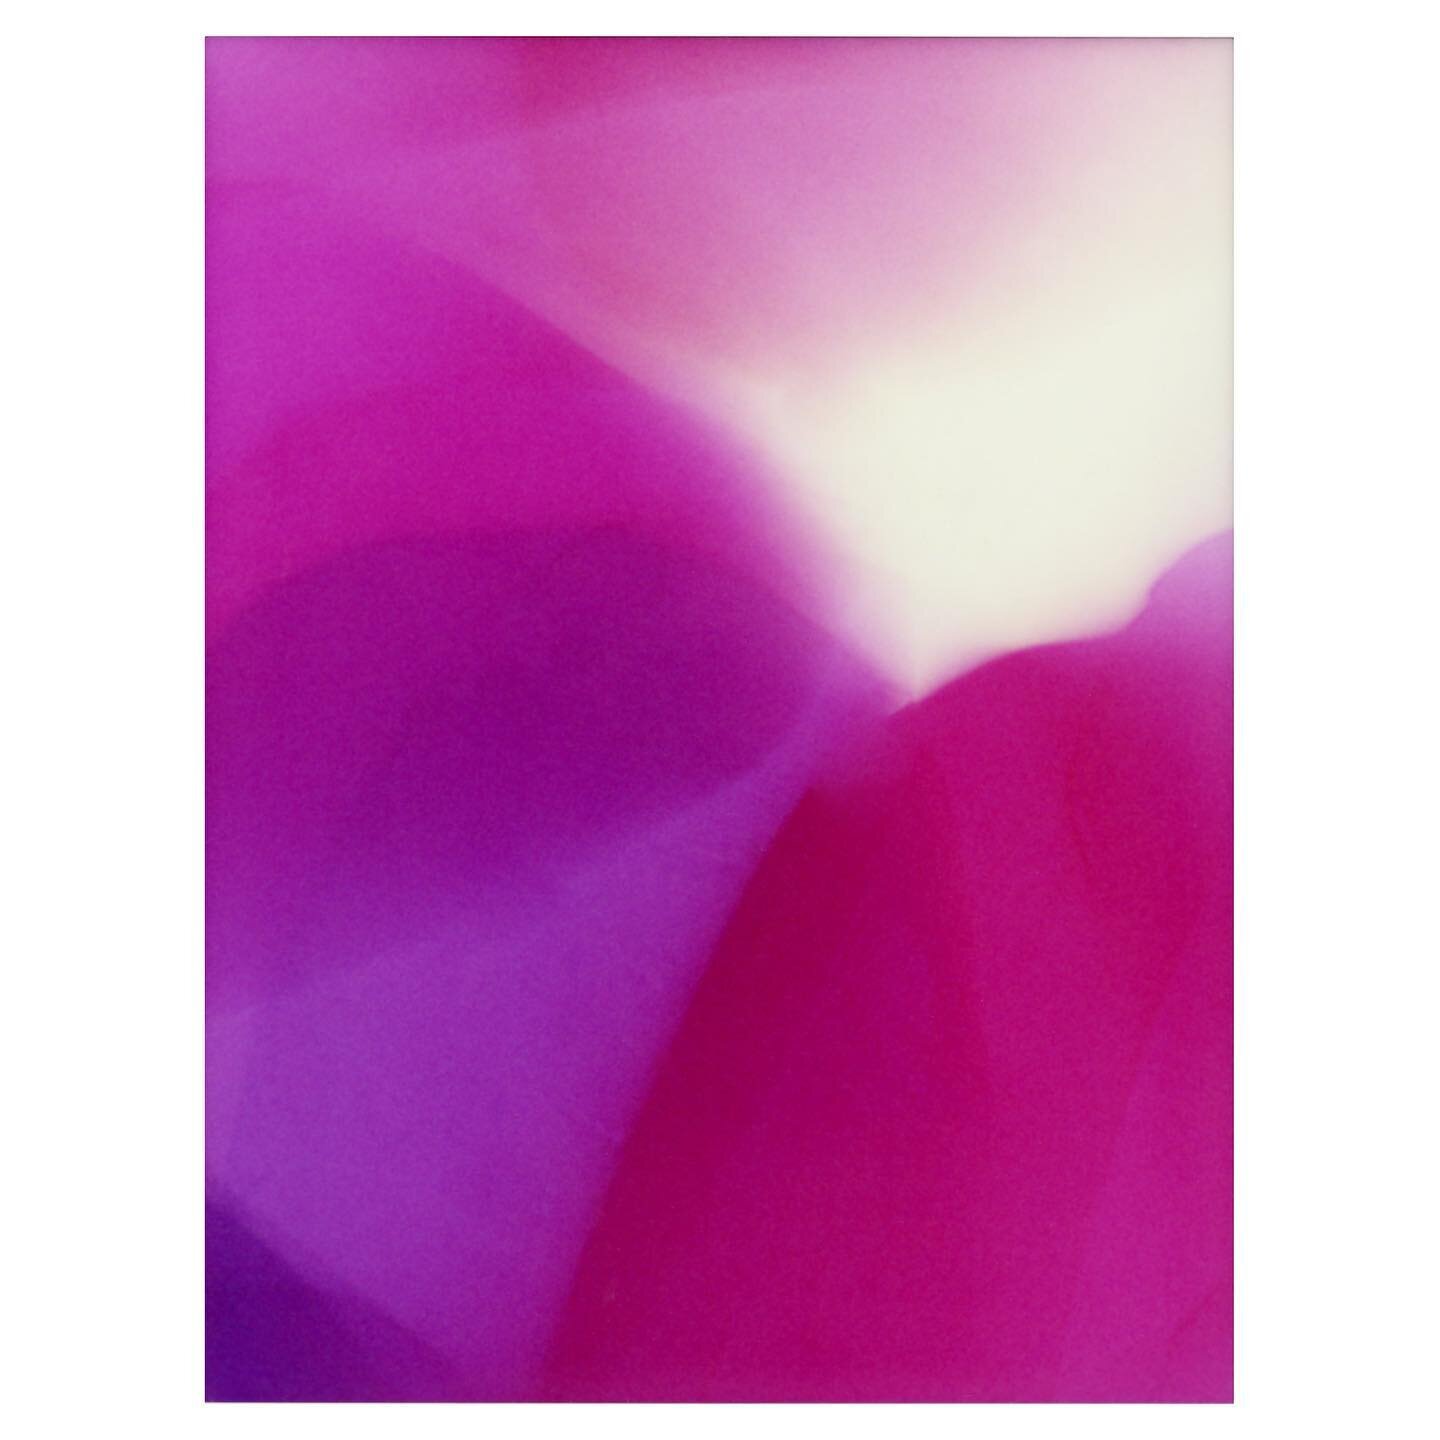 Living Proof. 15&rdquo; x 20&rdquo; Pigment Print from photogram on German Etching paper. Limited edition of 25. This new print is going to be at the @affordableartfairuk stand F7 with @ginacross_art from the 19th October